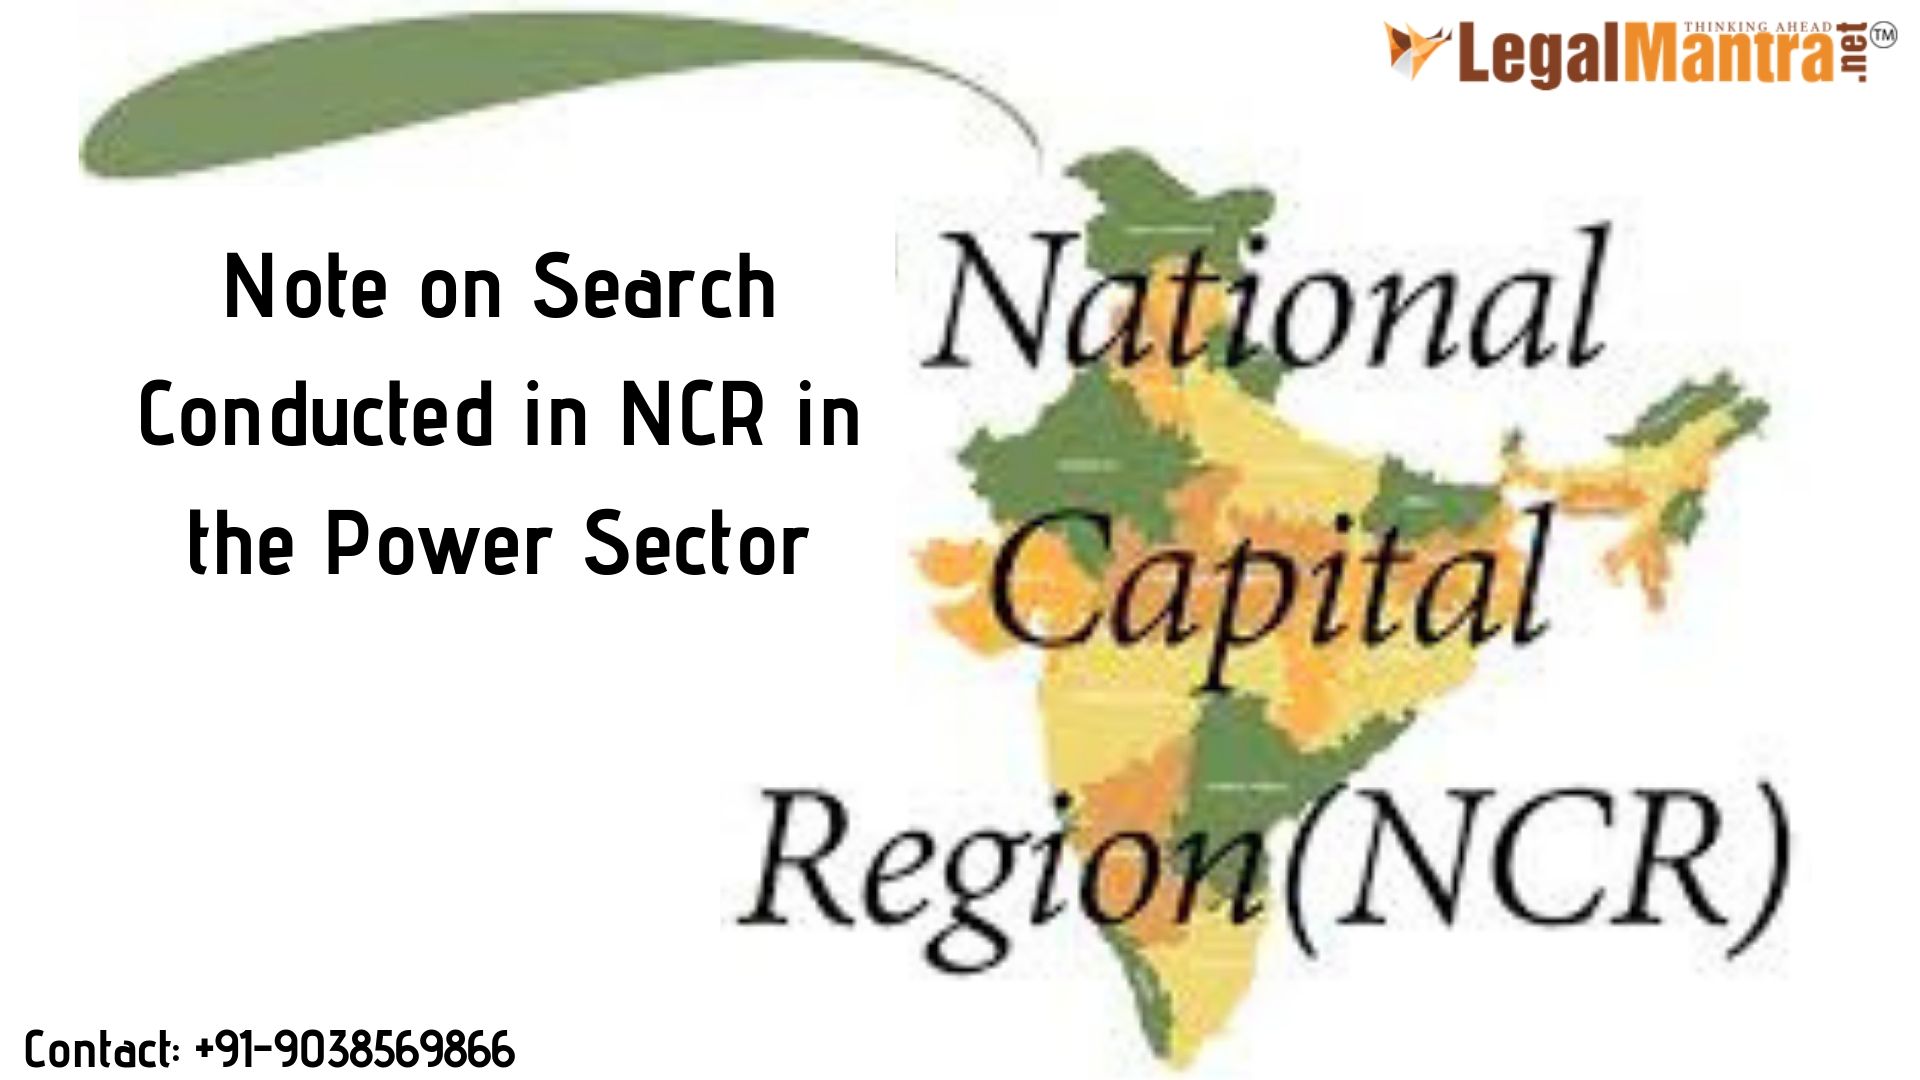 Note on Search Conducted in NCR on a Group in the Power sector